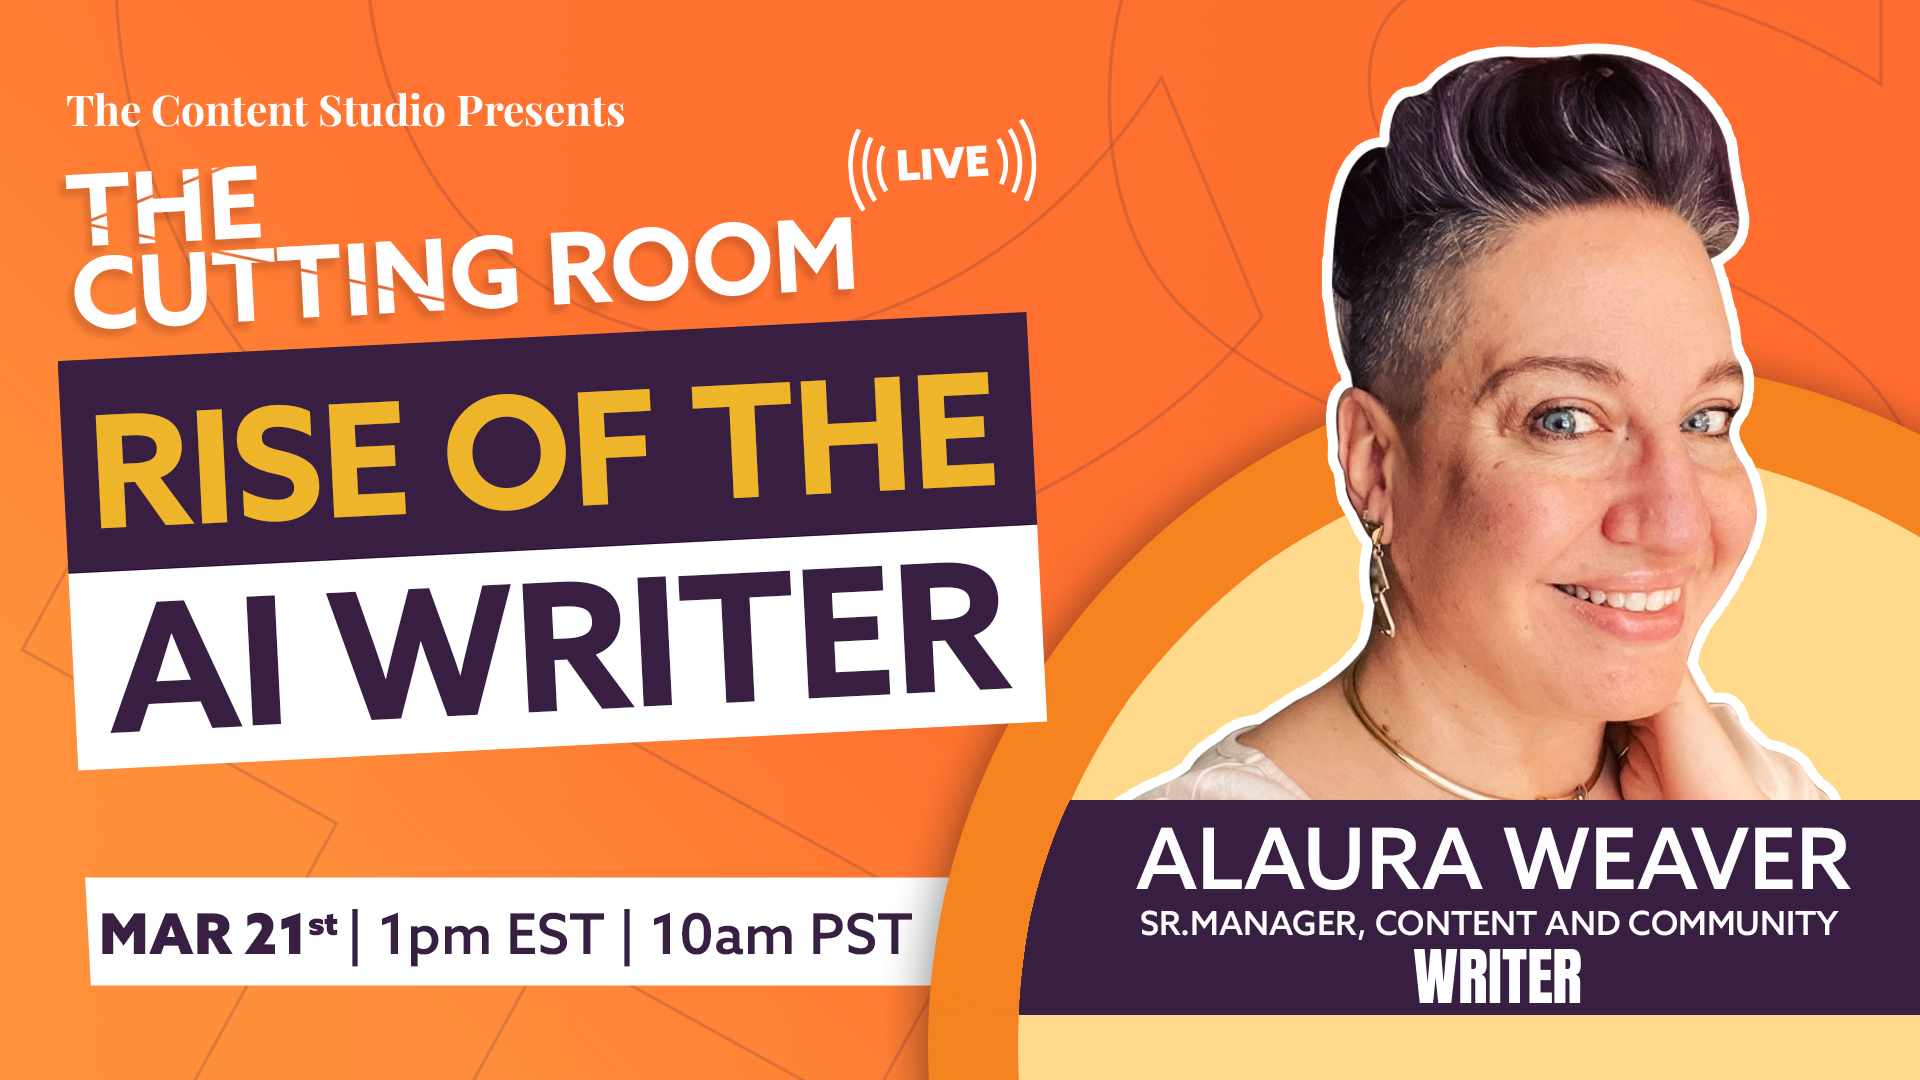 Alaura Weaver from Writer.com joins us live on The Cutting Room!